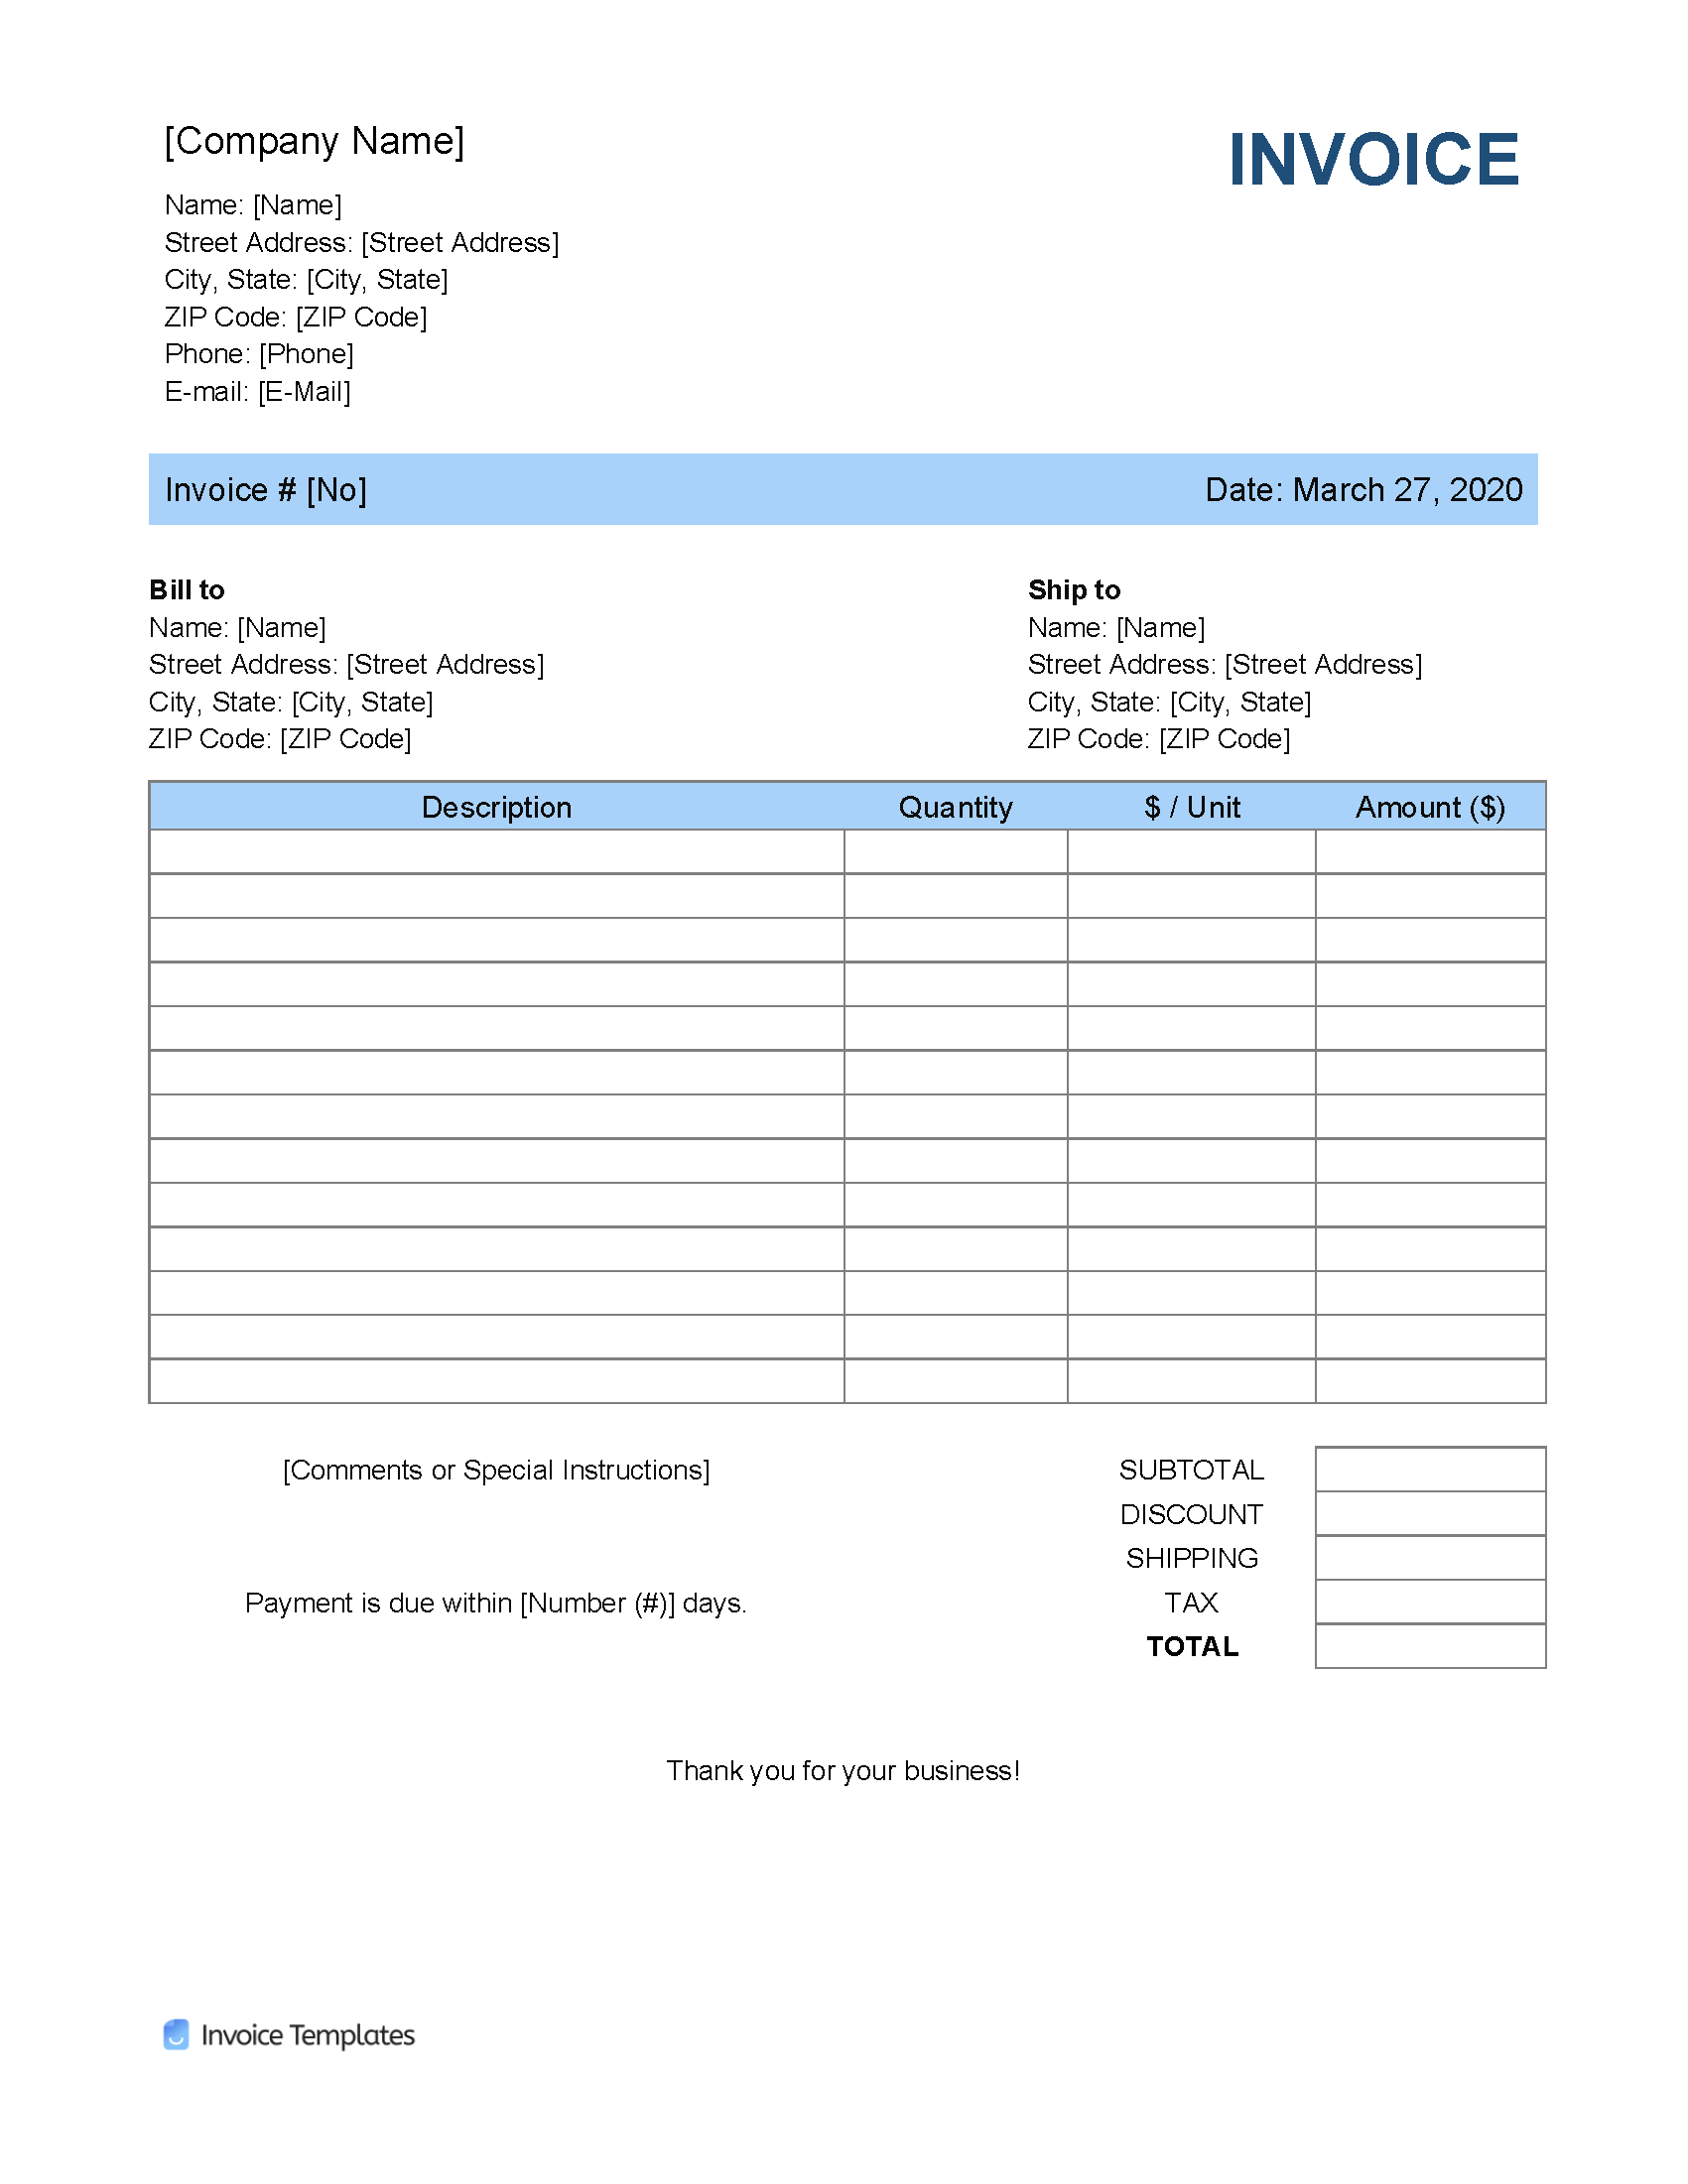 Invoice Template In Word from invoicetemplates.com